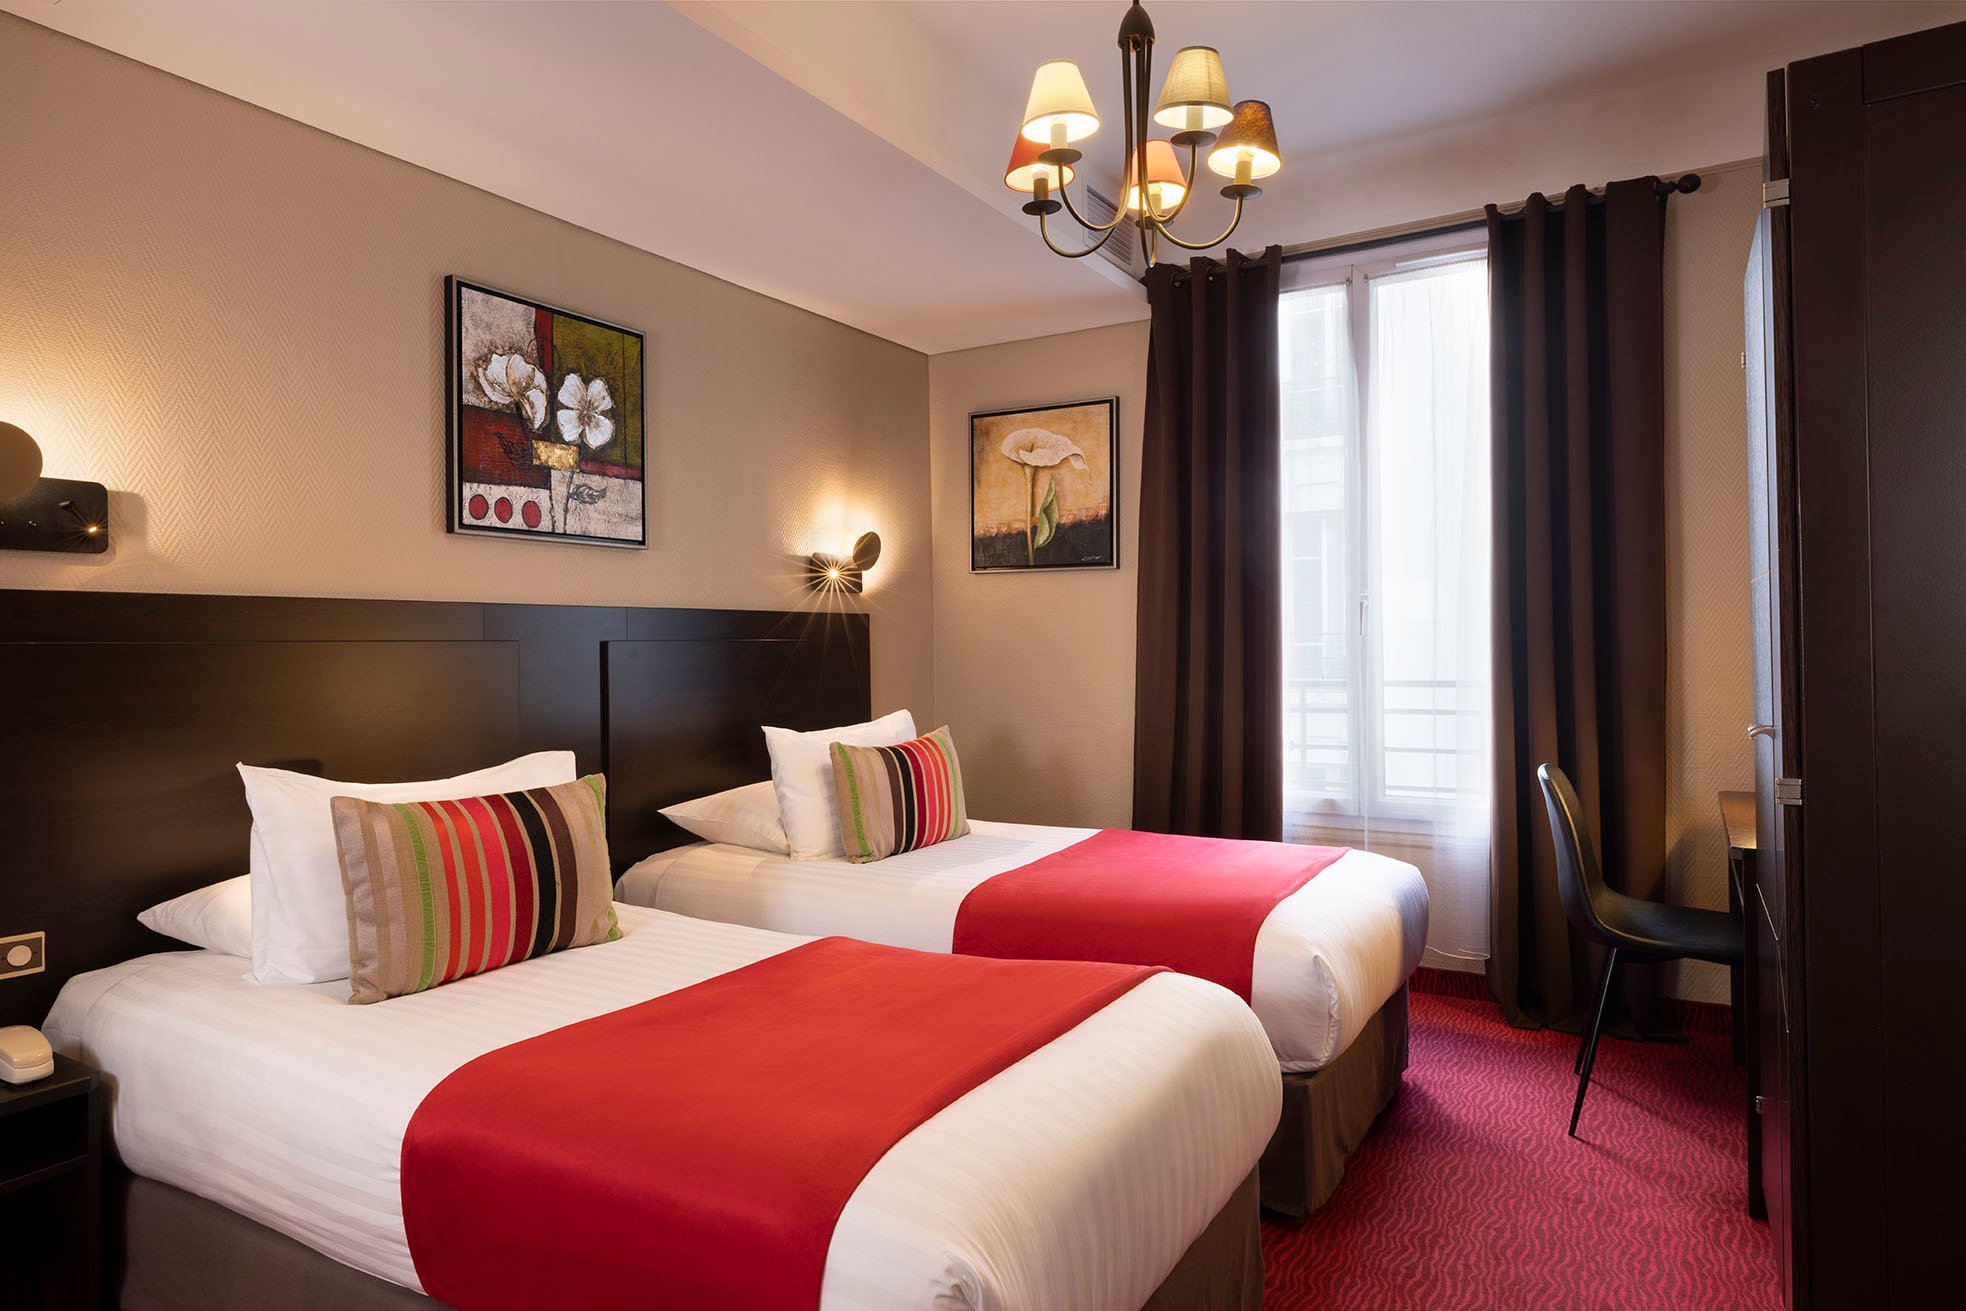 724/CHATILLON/Hotel/Chambres_/Tradition_Twin/16A6573_Tradition_Twin_-_Chatillon_Montparnasse_bd.jpg